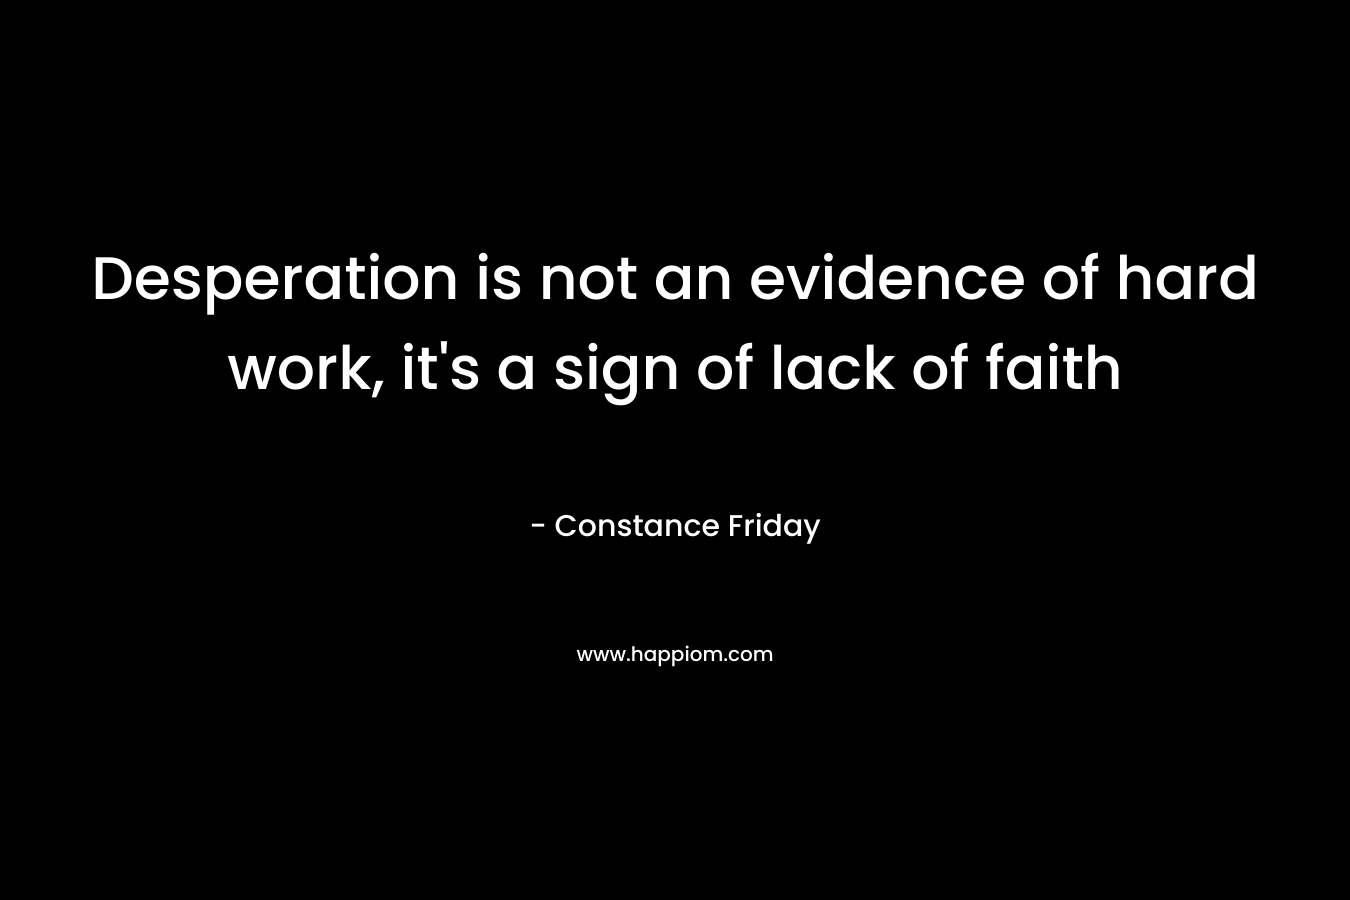 Desperation is not an evidence of hard work, it’s a sign of lack of faith – Constance Friday